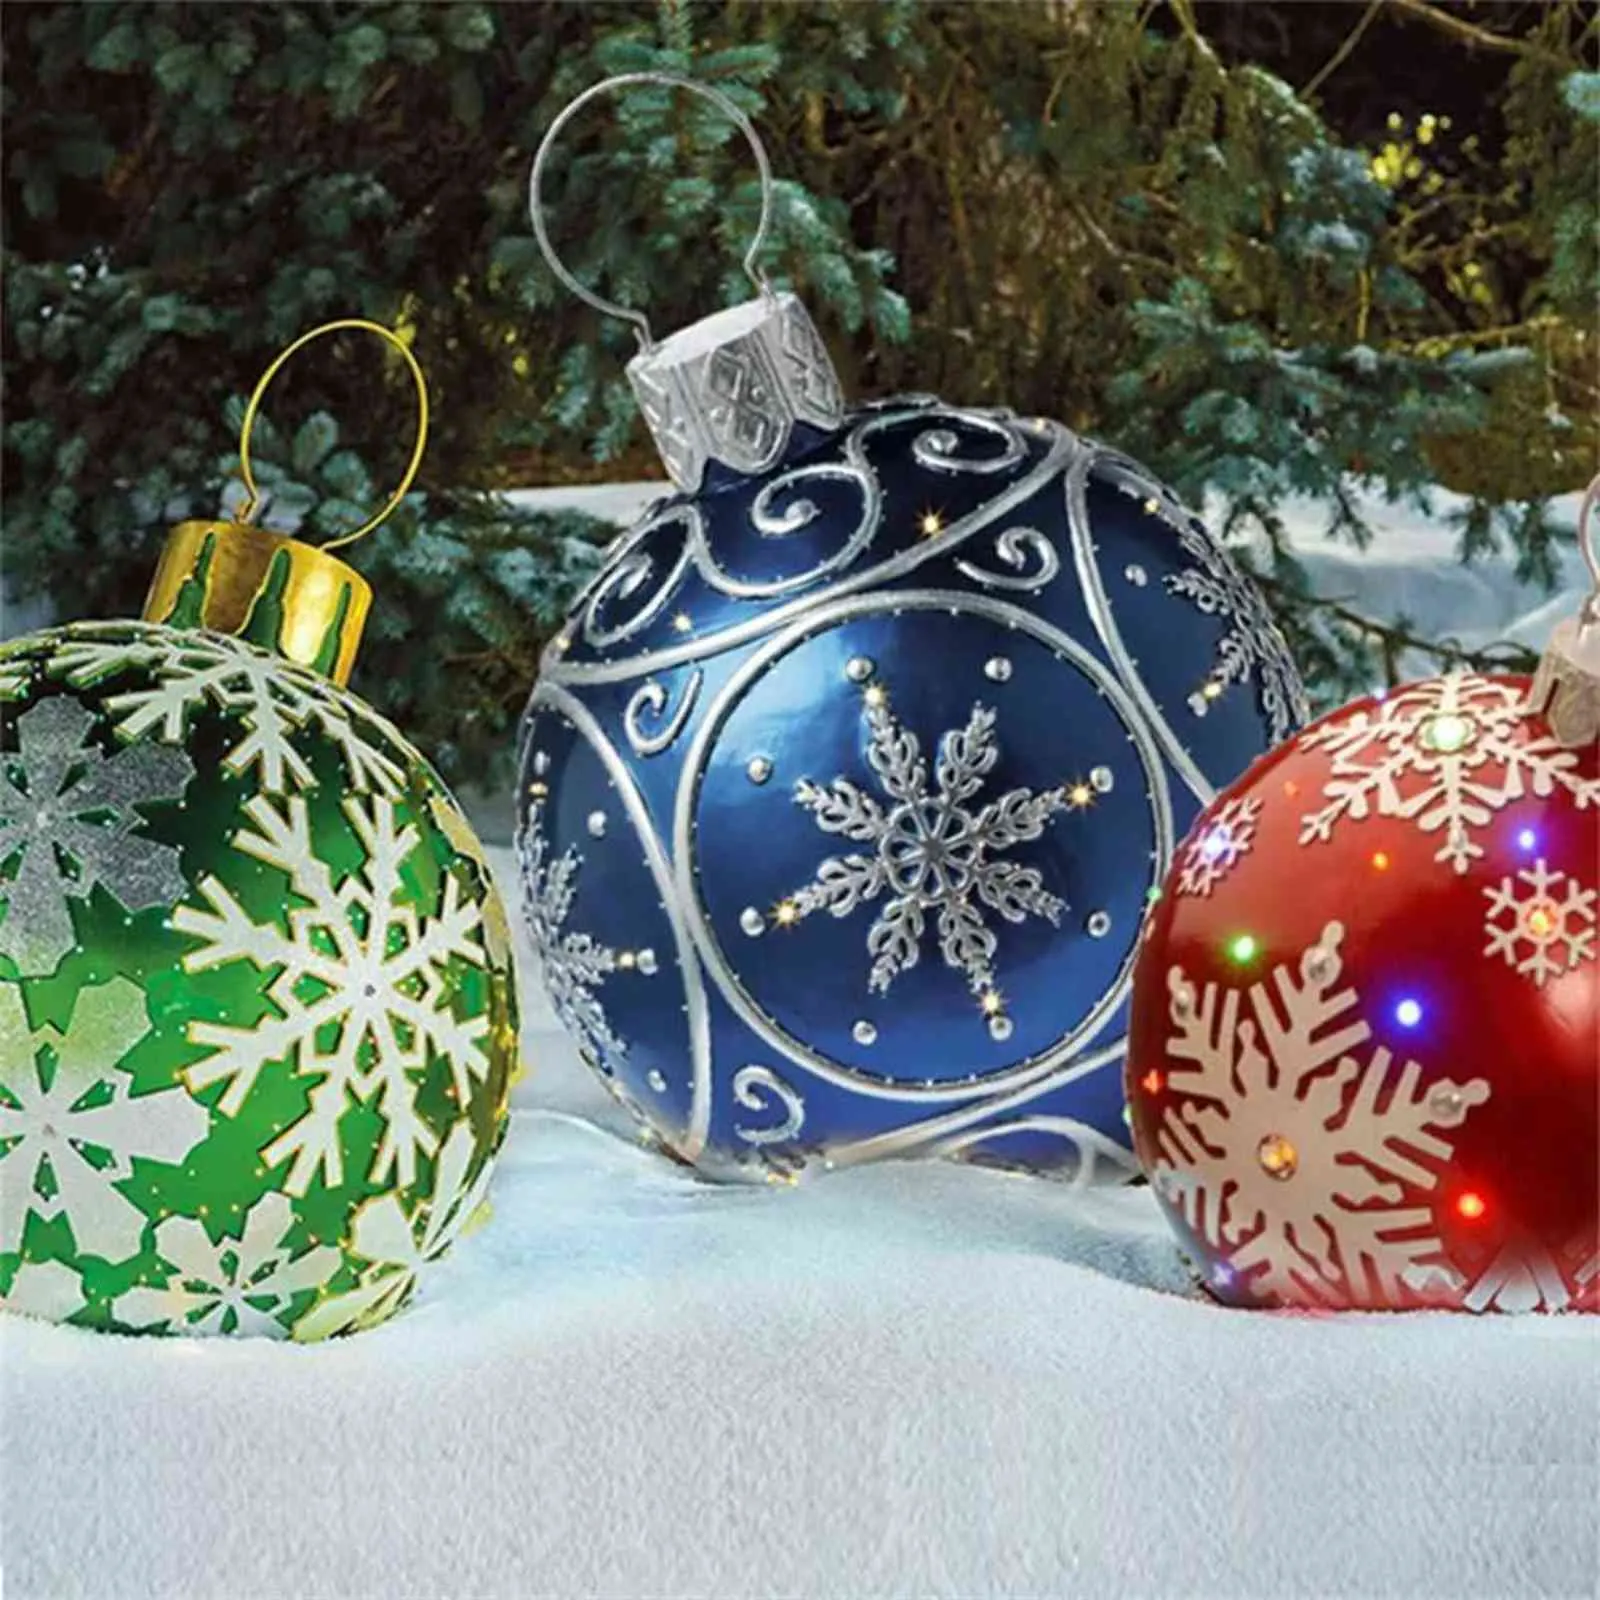 60Cm Large Christmas Balls Tree Decorations Outdoor Atmosphere Inflatable Baubles Toys for Home Gift Ball Ornament 21110577915112098986